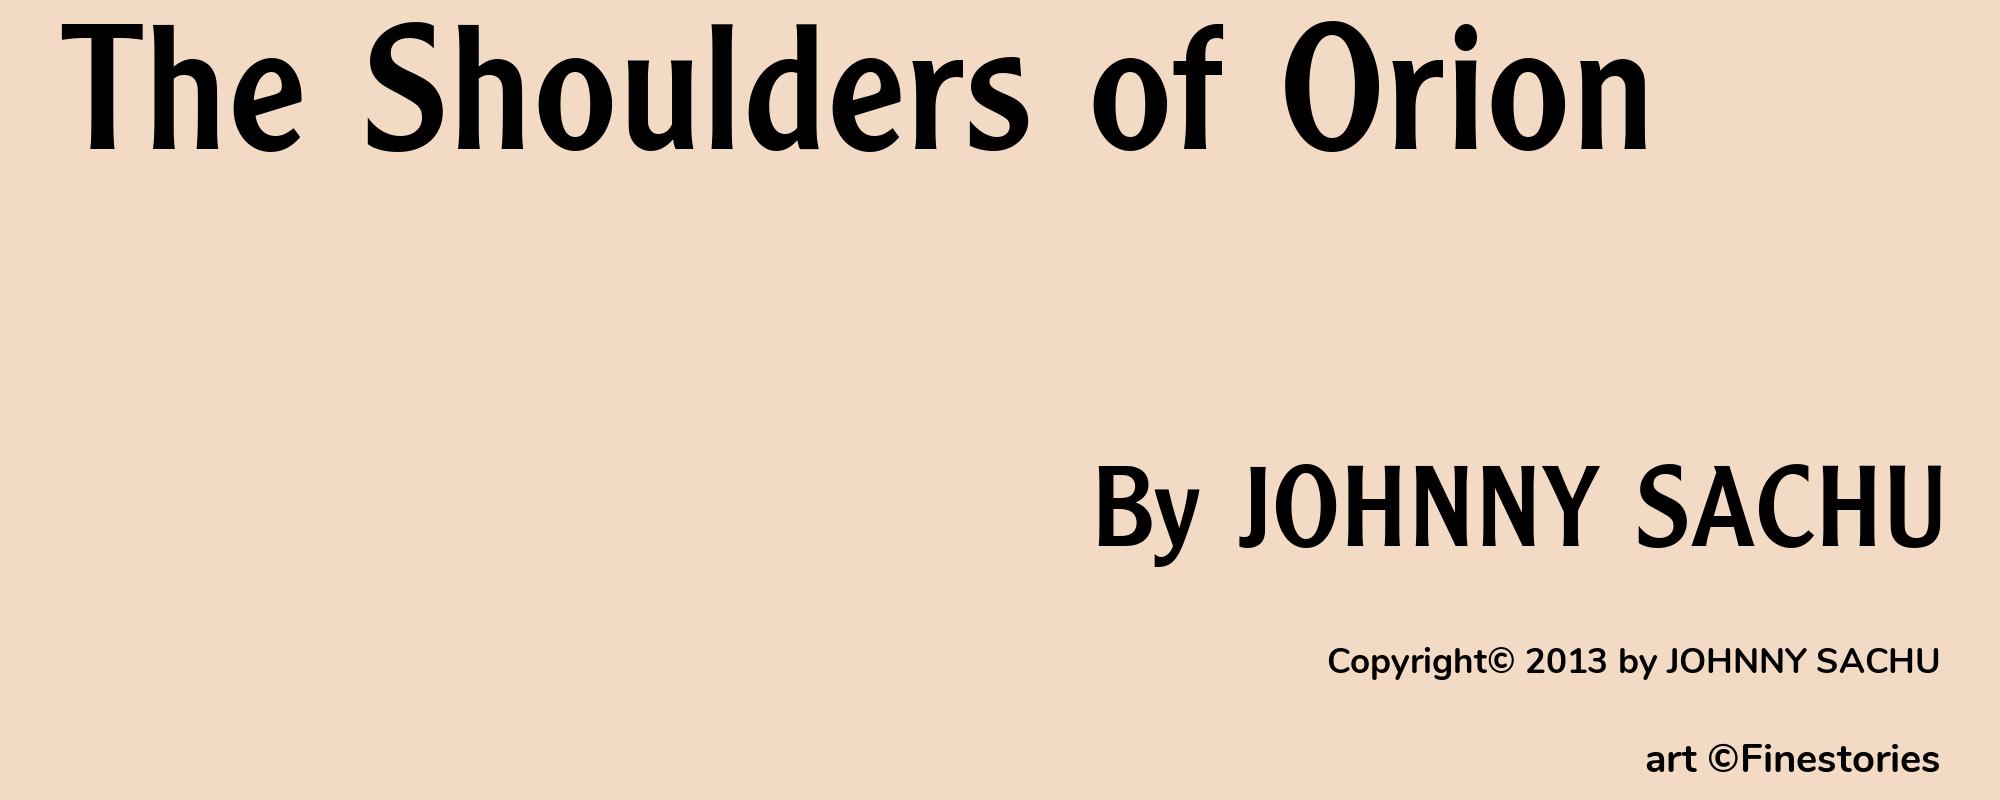 The Shoulders of Orion - Cover